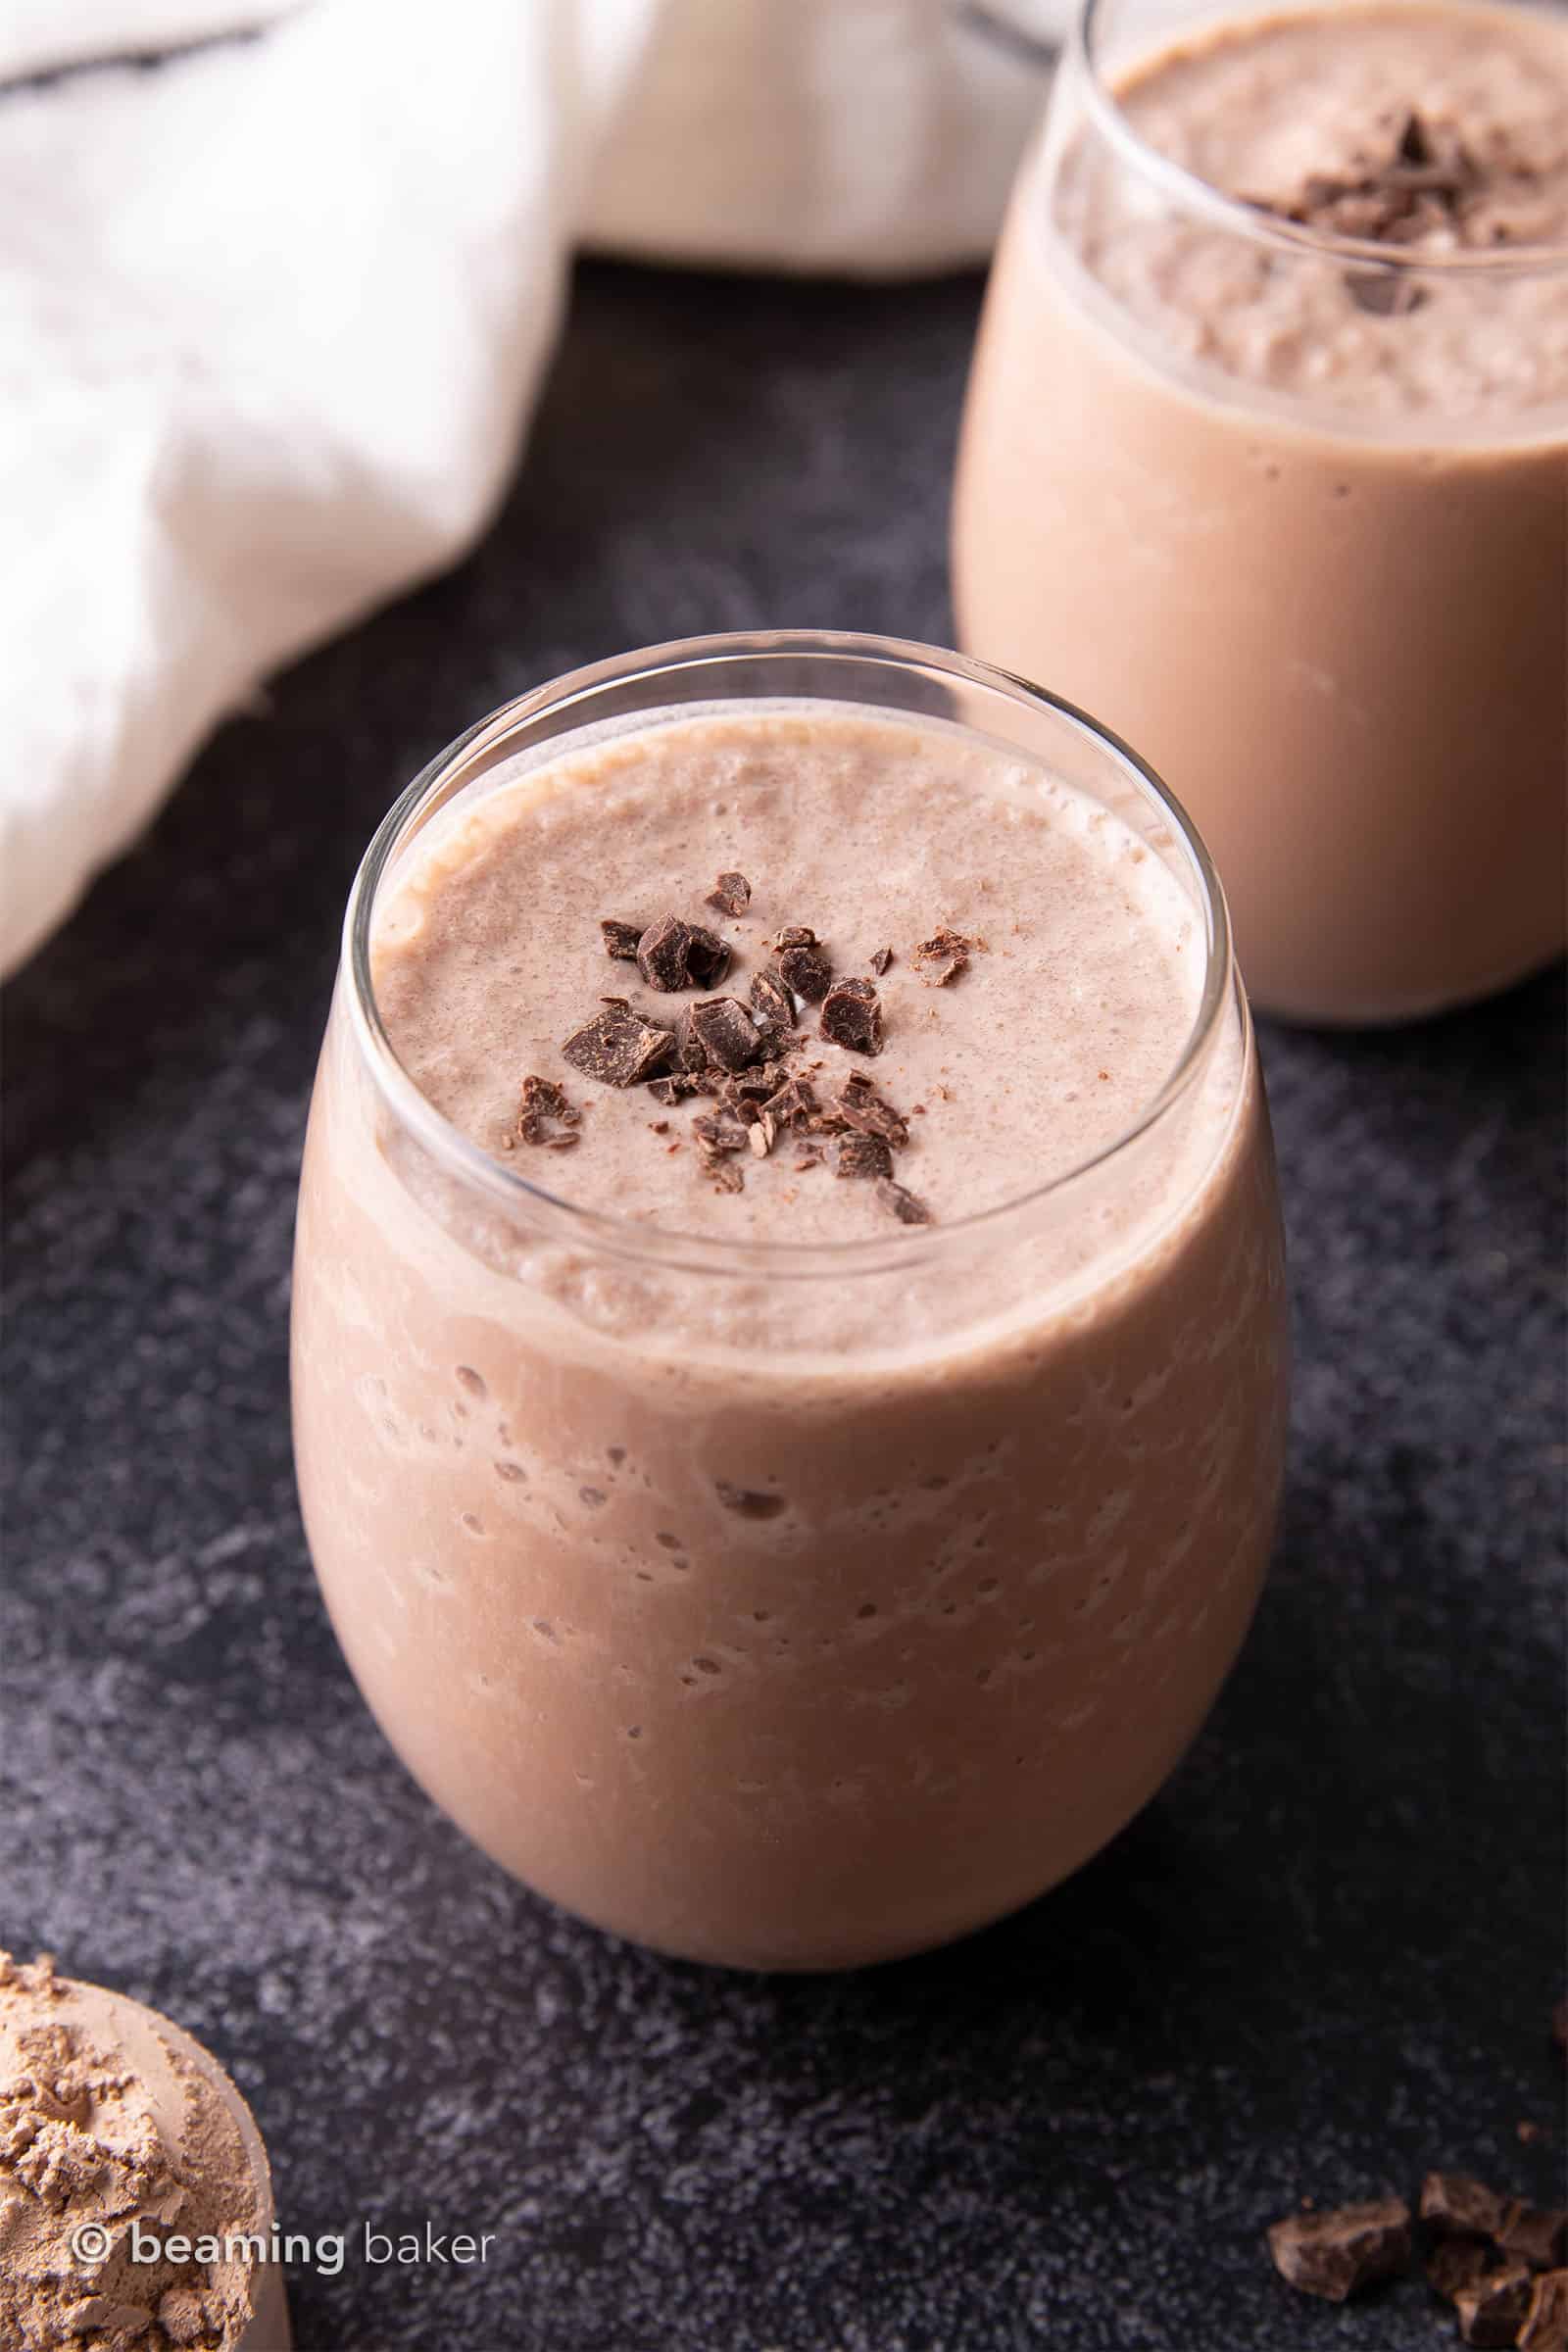 Chocolate Vegan Protein Shake Recipe (V, GF): all you need are 5 minutes & 3 ingredients to make the EASIEST & best vegan protein shake recipe—delicious, healthy & protein-rich! 22g of protein per serving. Low Sugar, Gluten Free. #Vegan #Protein #Shake #Recipe | Recipe at BeamingBaker.com